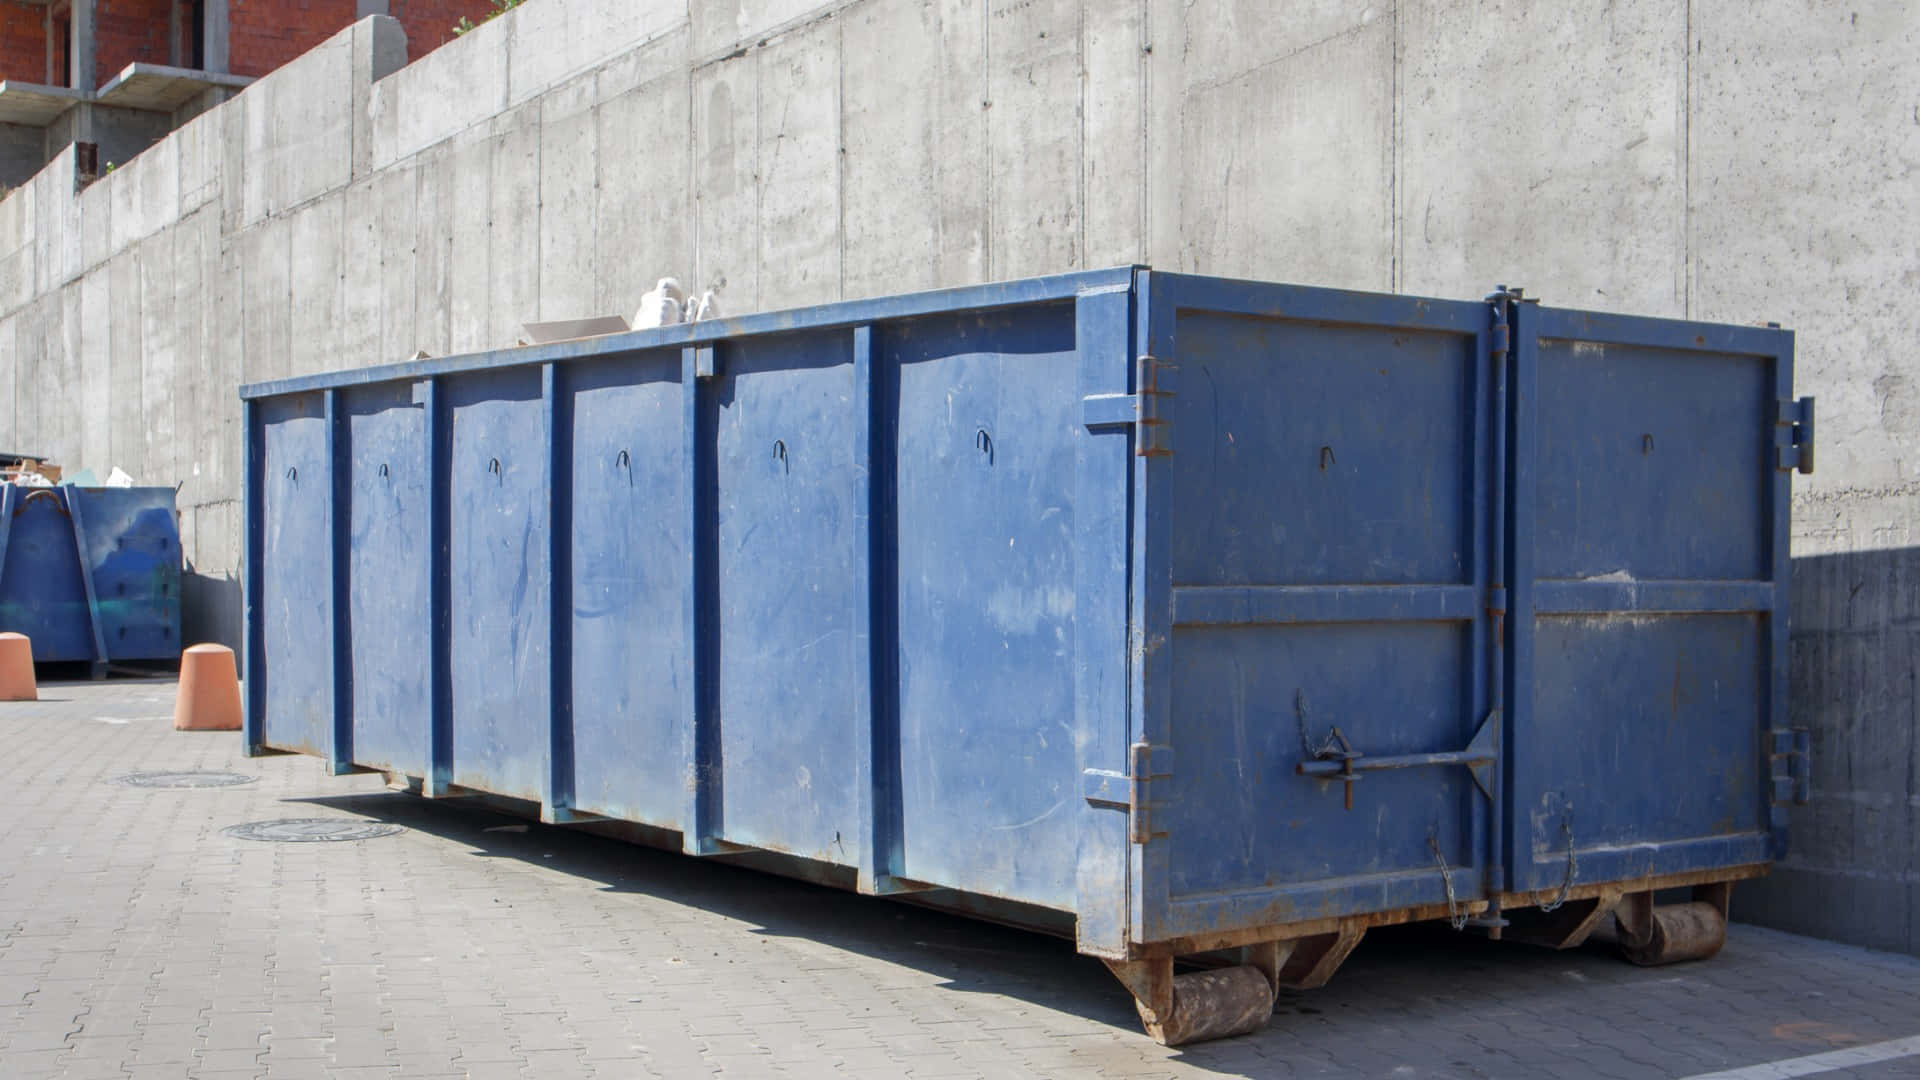 A Blue Container Sitting On The Side Of A Concrete Wall